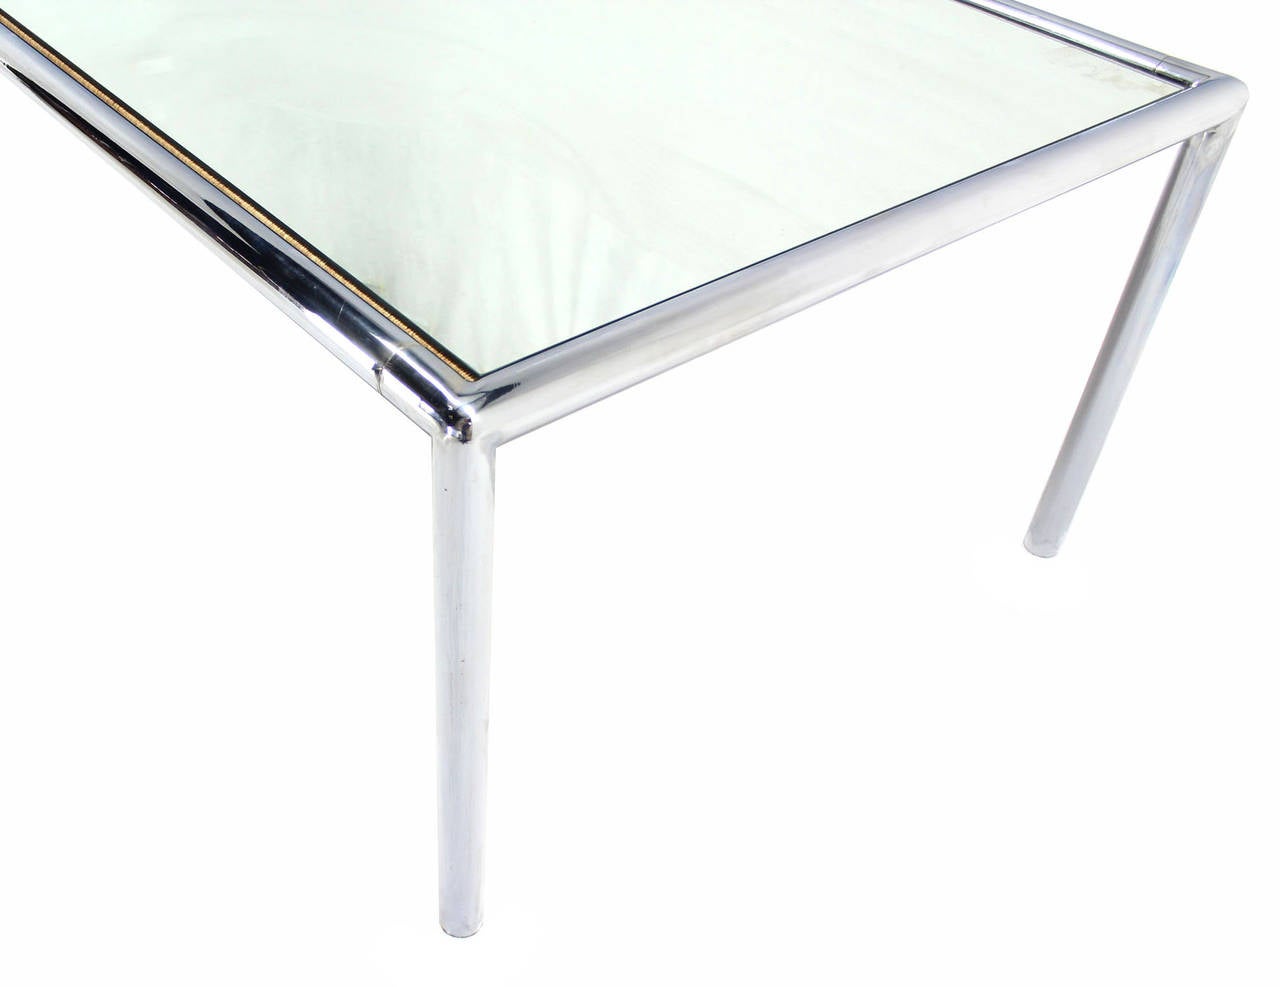 American Extra Long Chrome Tubular Design Dining or Conference Table w/ Mirrored Top